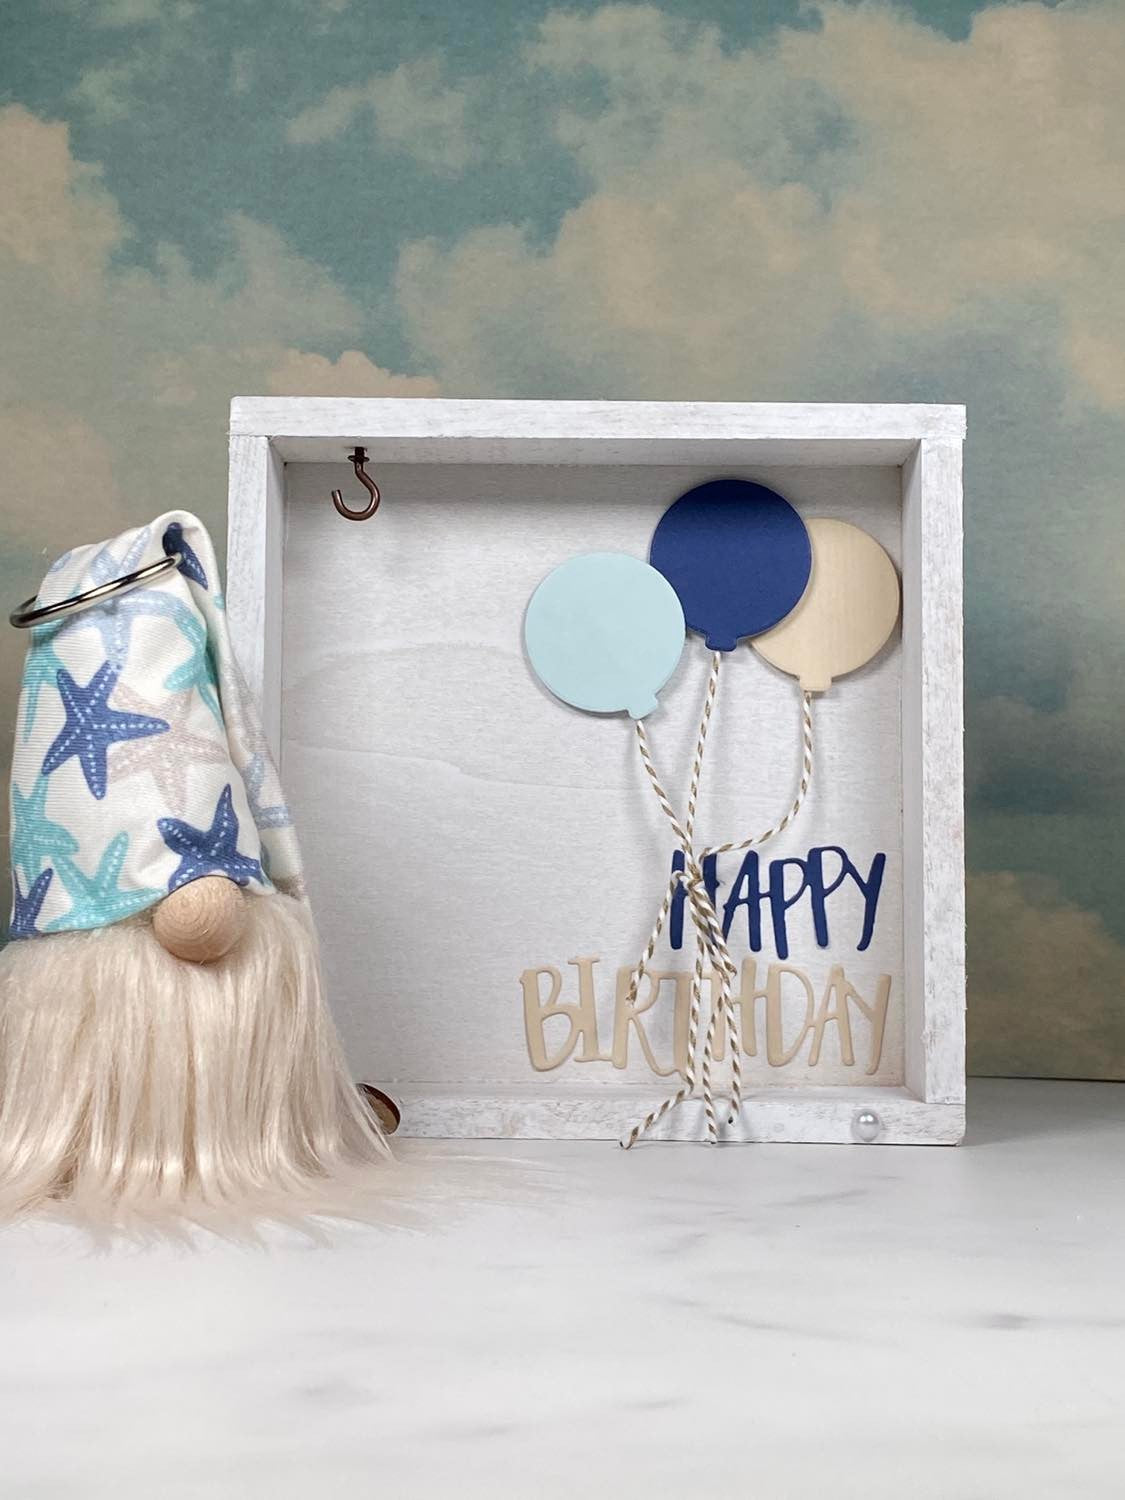 Gift Set - Happy Birthday Gnome Decor Gift set with Balloons and 4" Plush Gnome